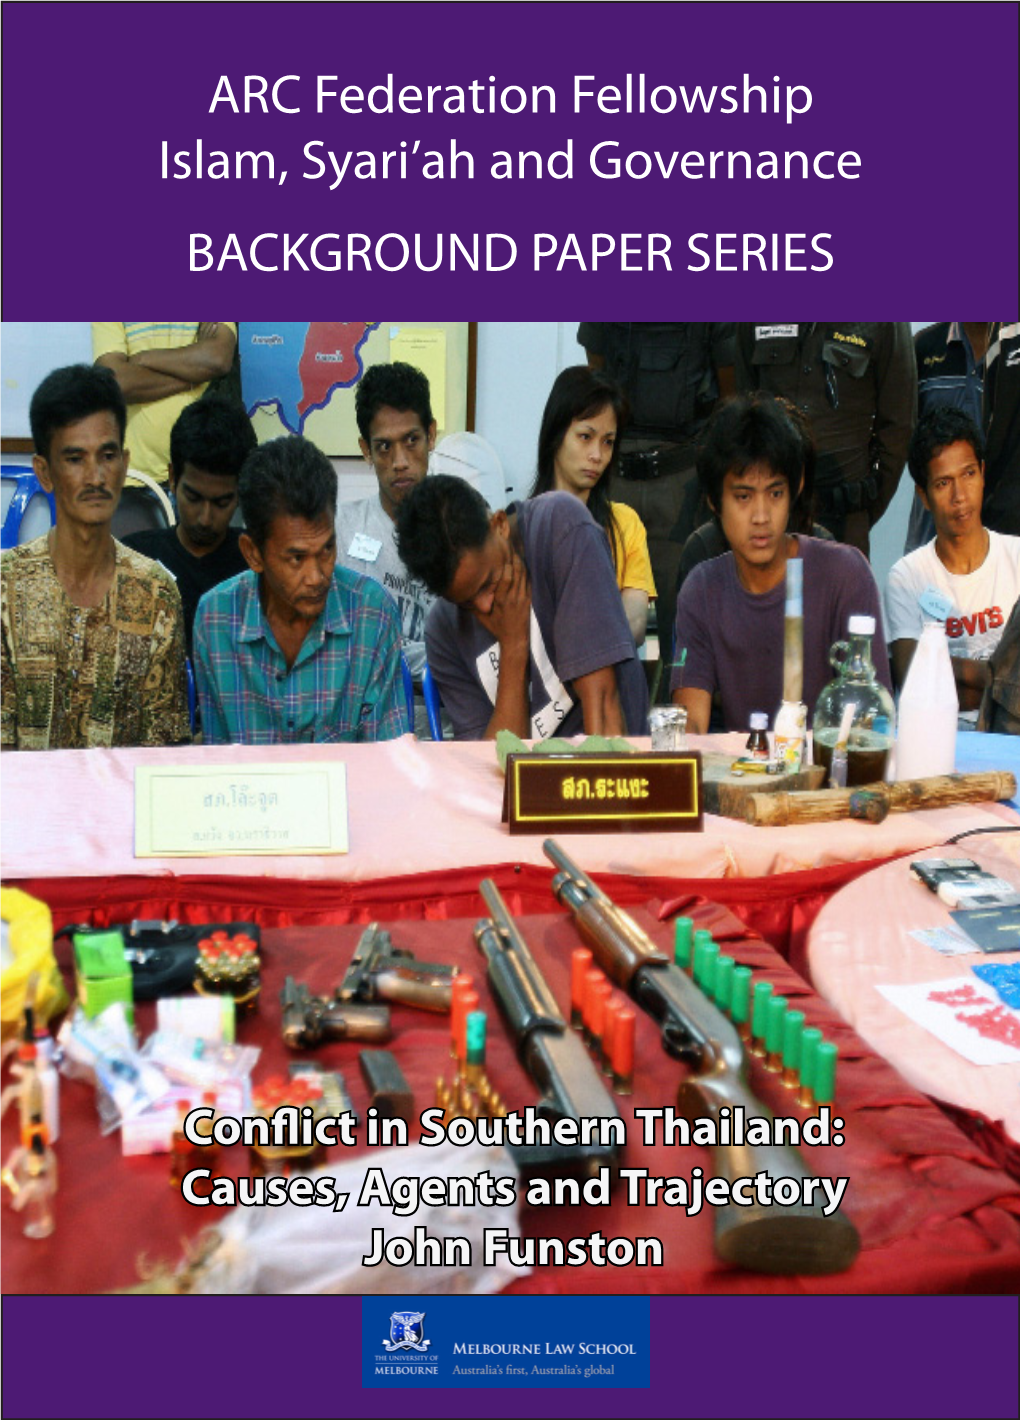 Conflict in Southern Thailand